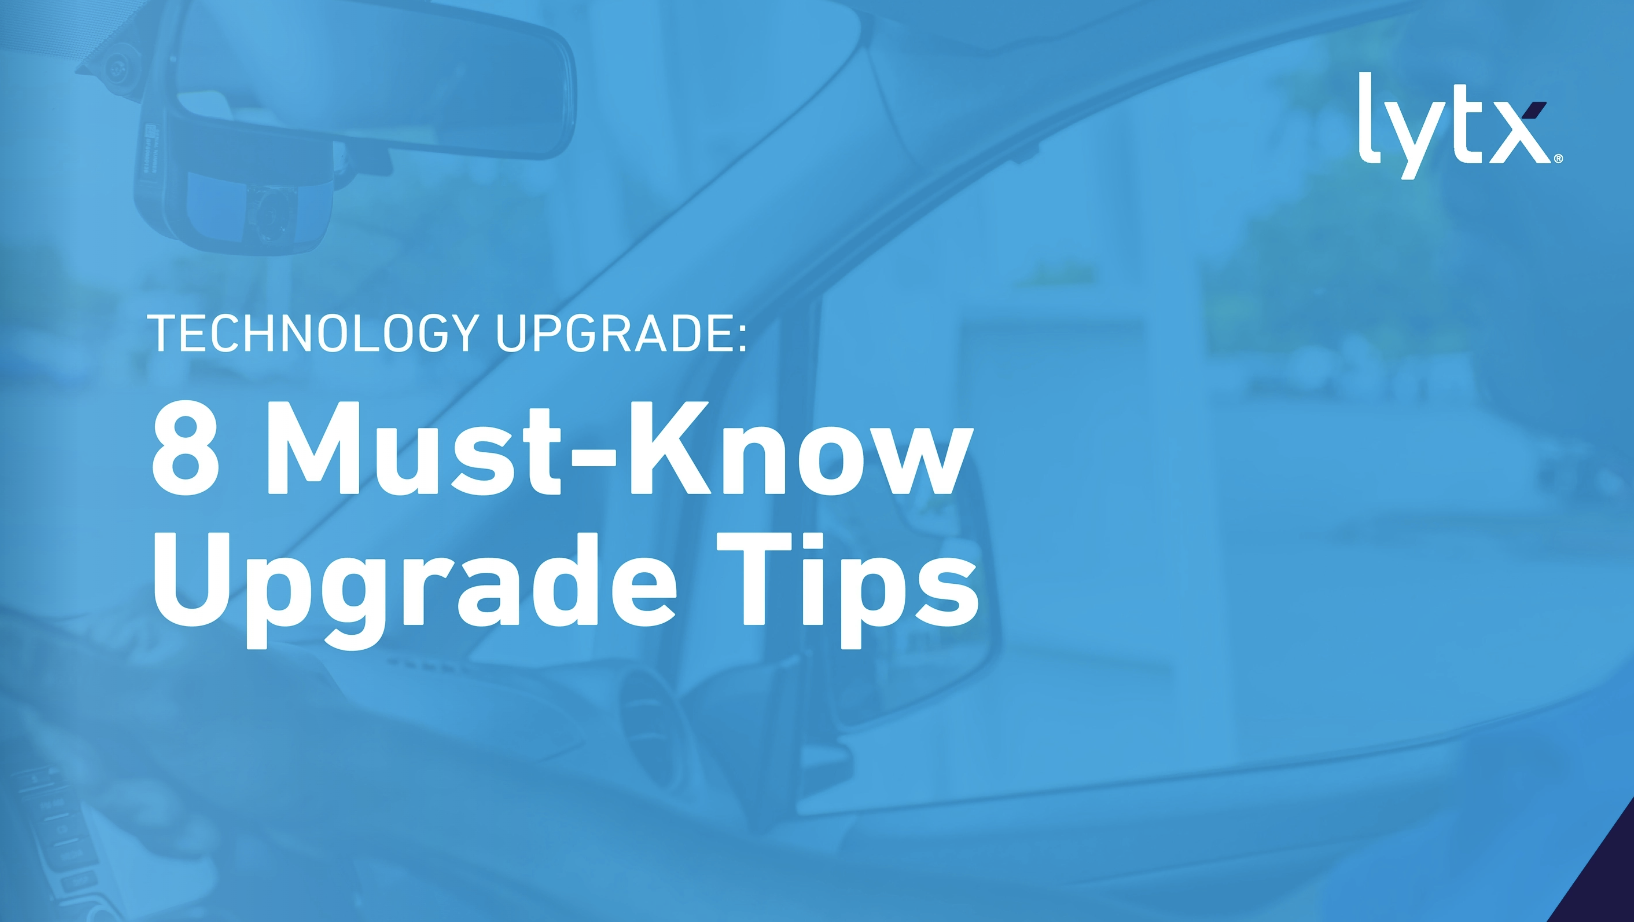 "Technology Upgrade: 8 Must-Know Upgrade Tips"